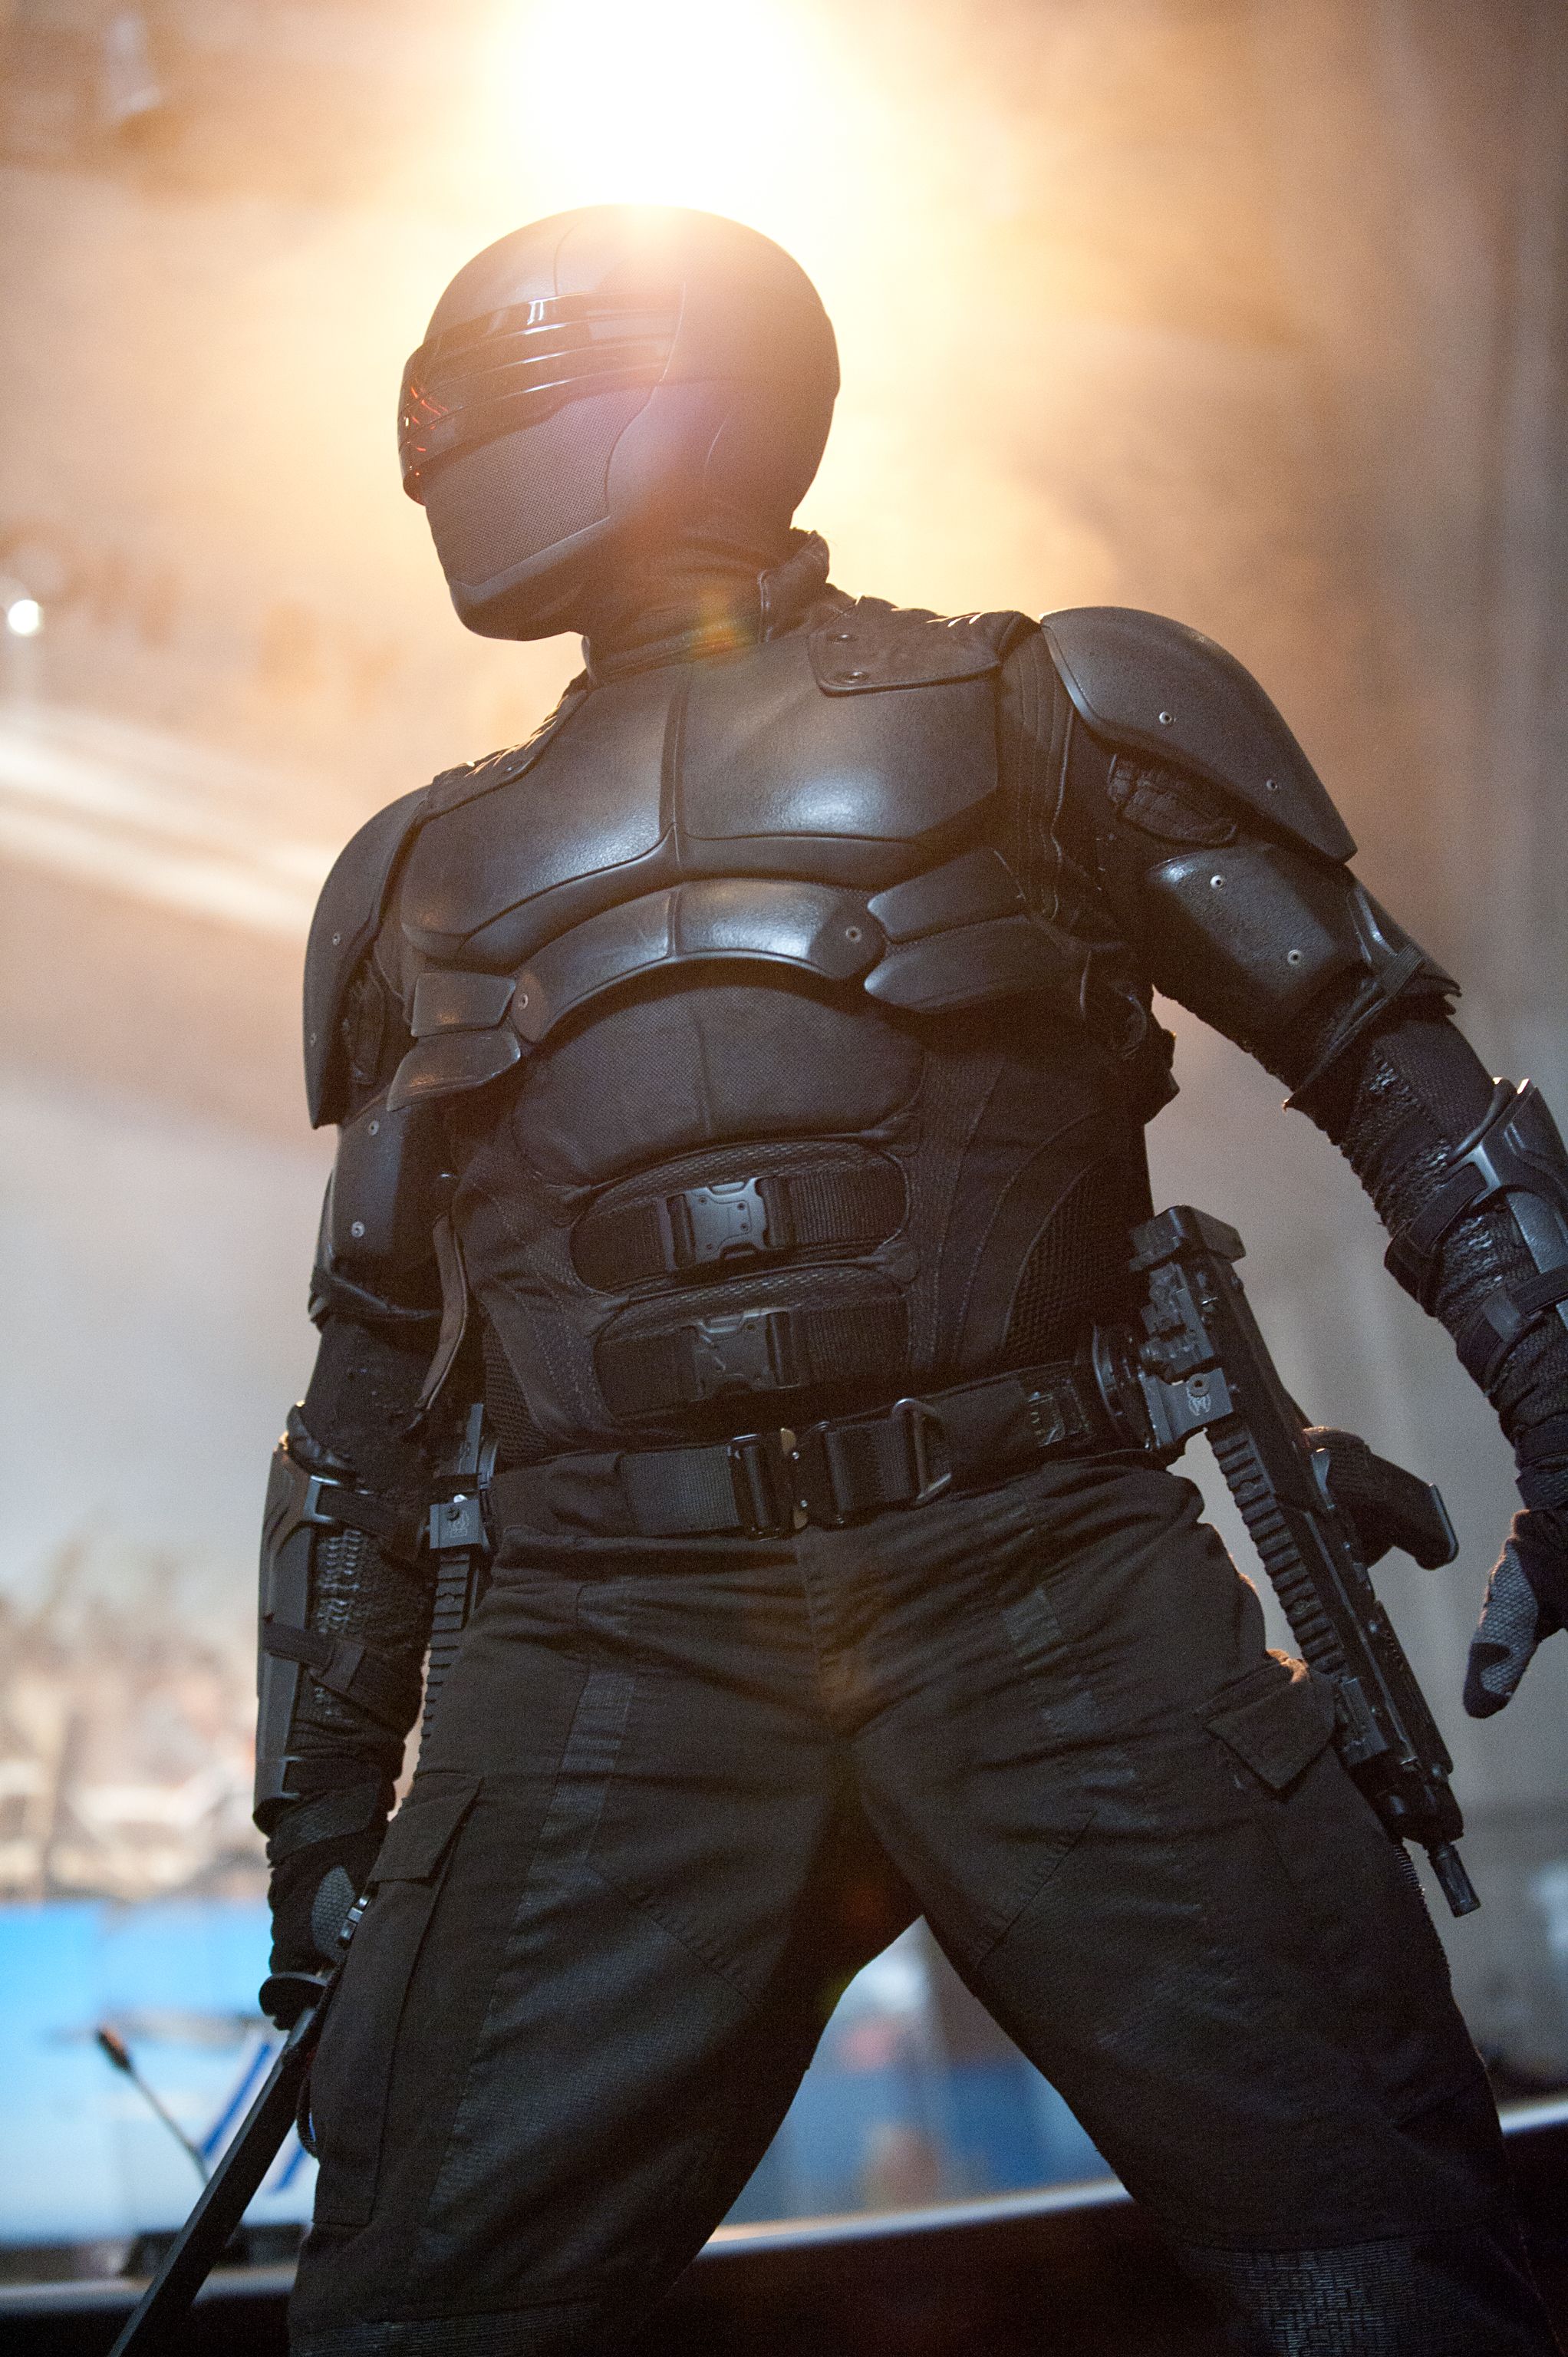 Snake Eyes Movie in the Works as Paramount Reboots G.I. Joe